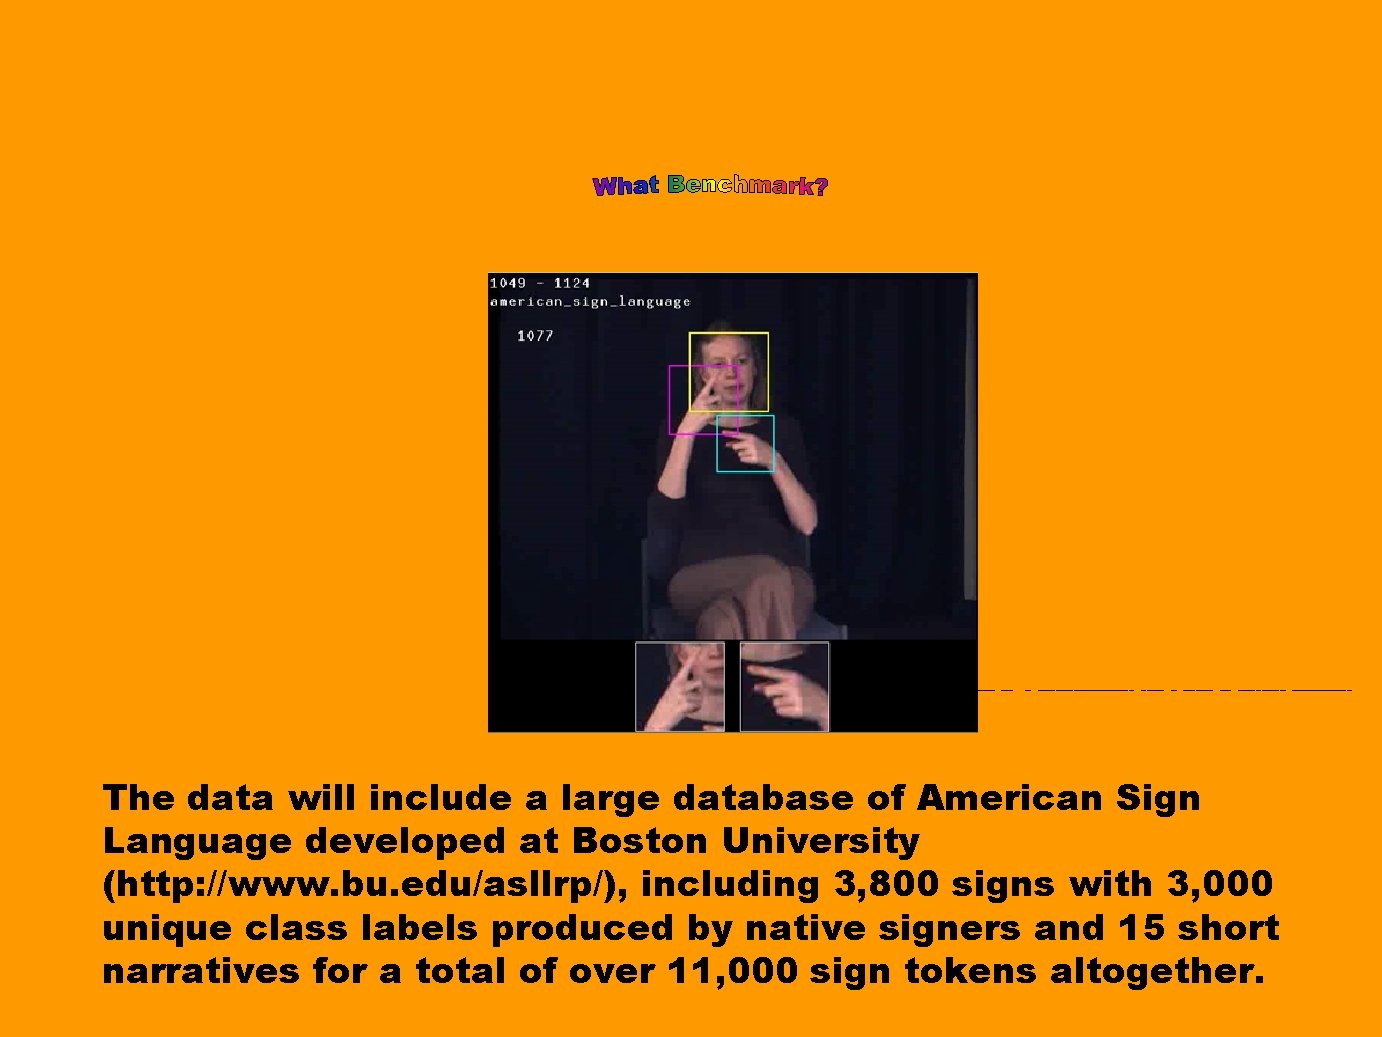 The data will include a large database of American Sign Language developed at Boston